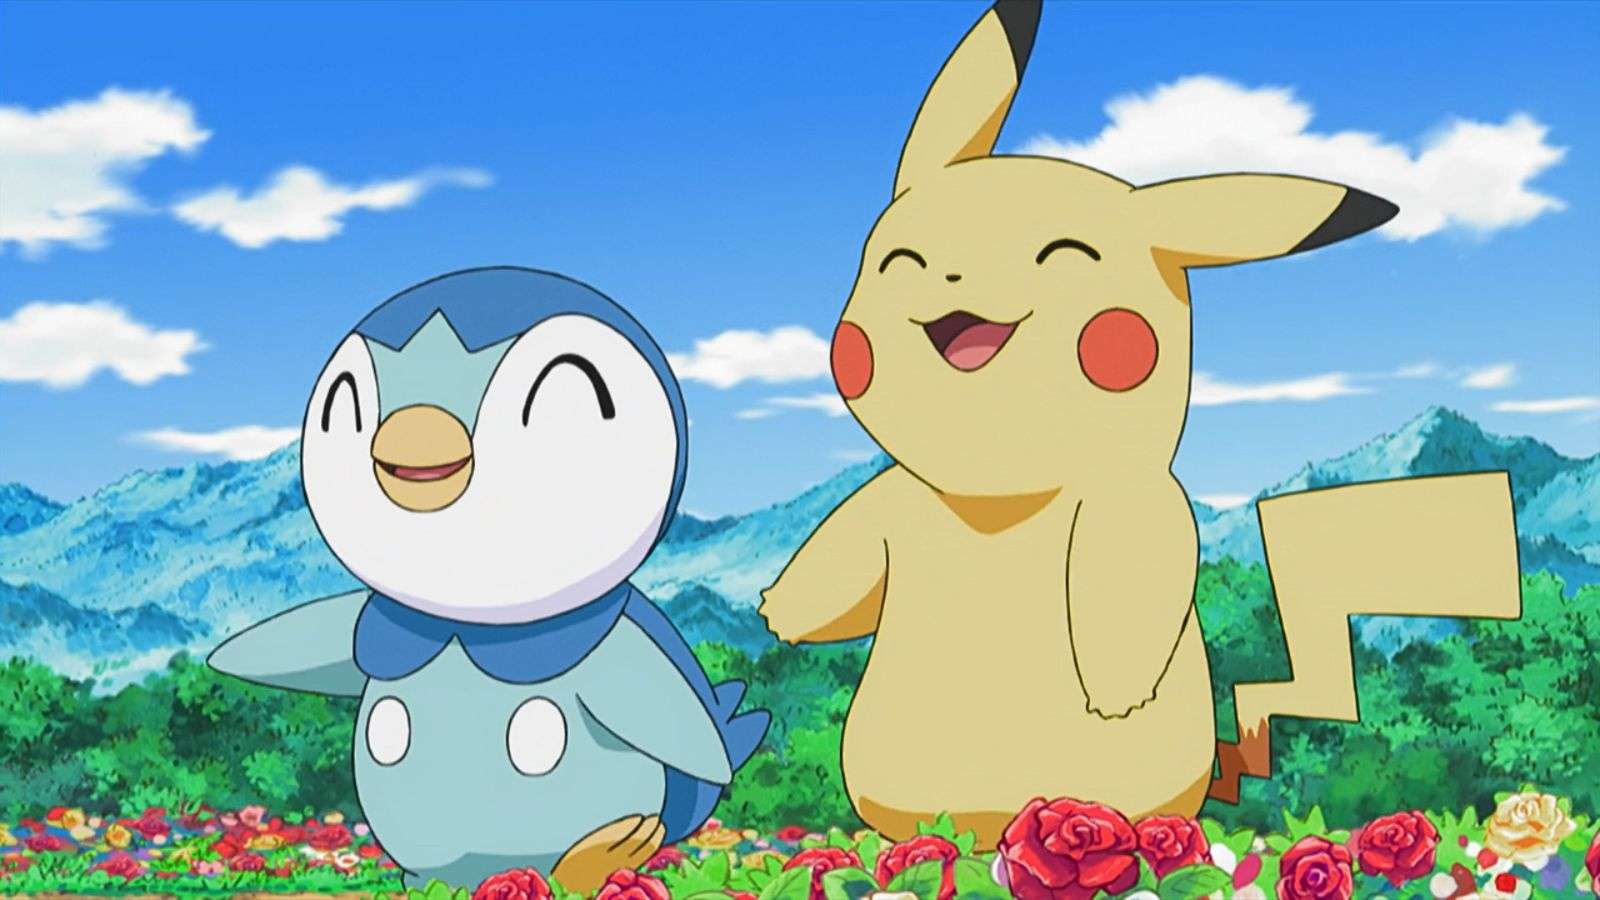 Piplup and Pikachu in garden from Pokemon anime.